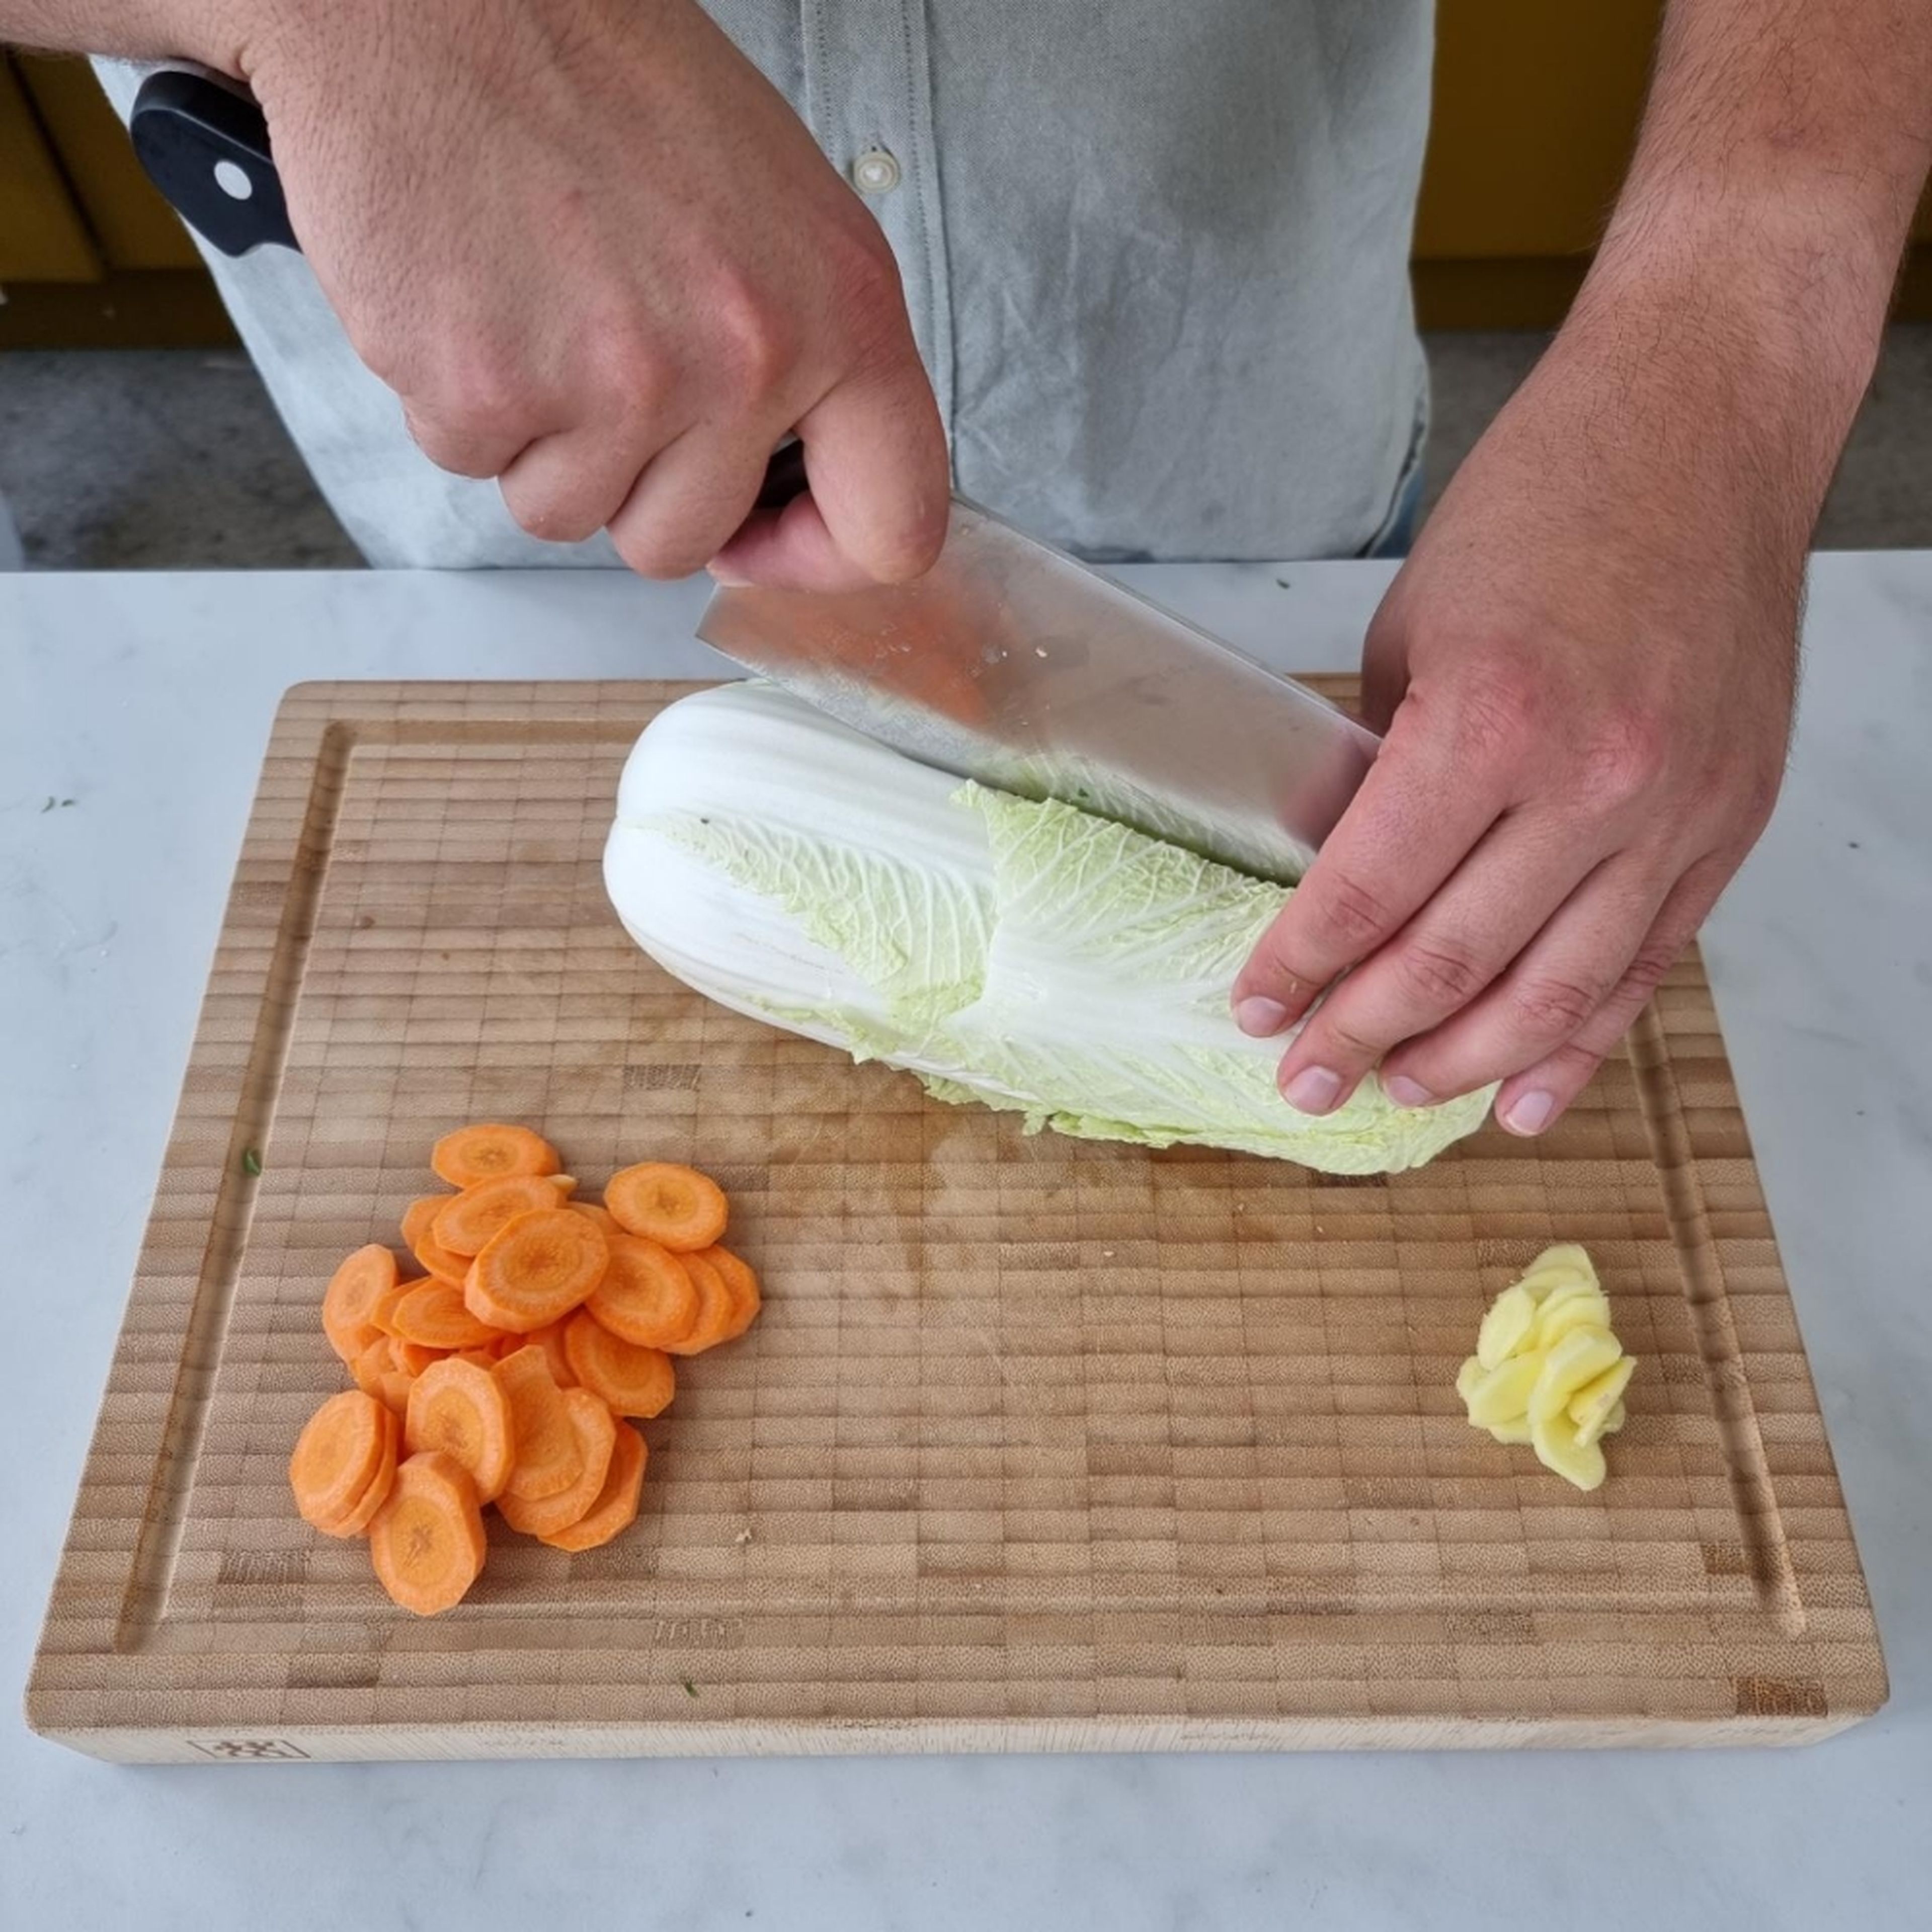 Cut carrot into thin slices. Roughly cut the cabbage into pieces. Cut the white of the scallion into 1 cm pieces. Peel ginger and cut into fine cubes.